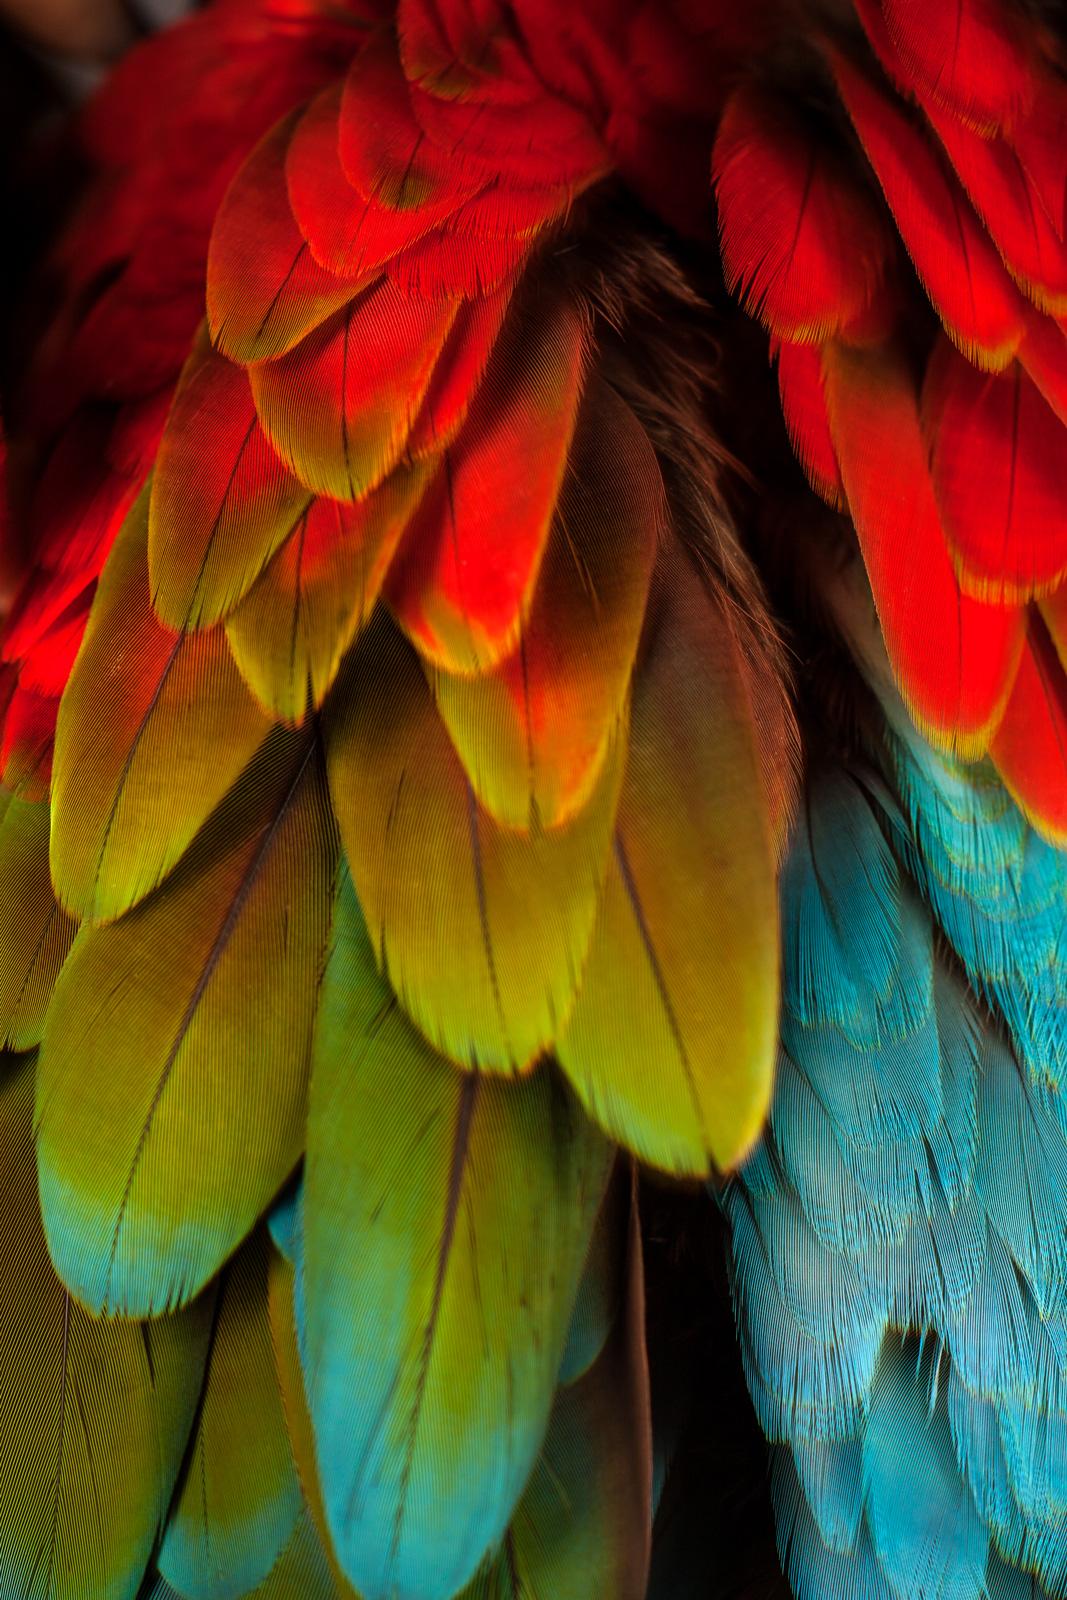 Macaw #5 - Animal signed limited edition contemporary fine art print, Bird, Red - Brown Color Photograph by Tim Platt